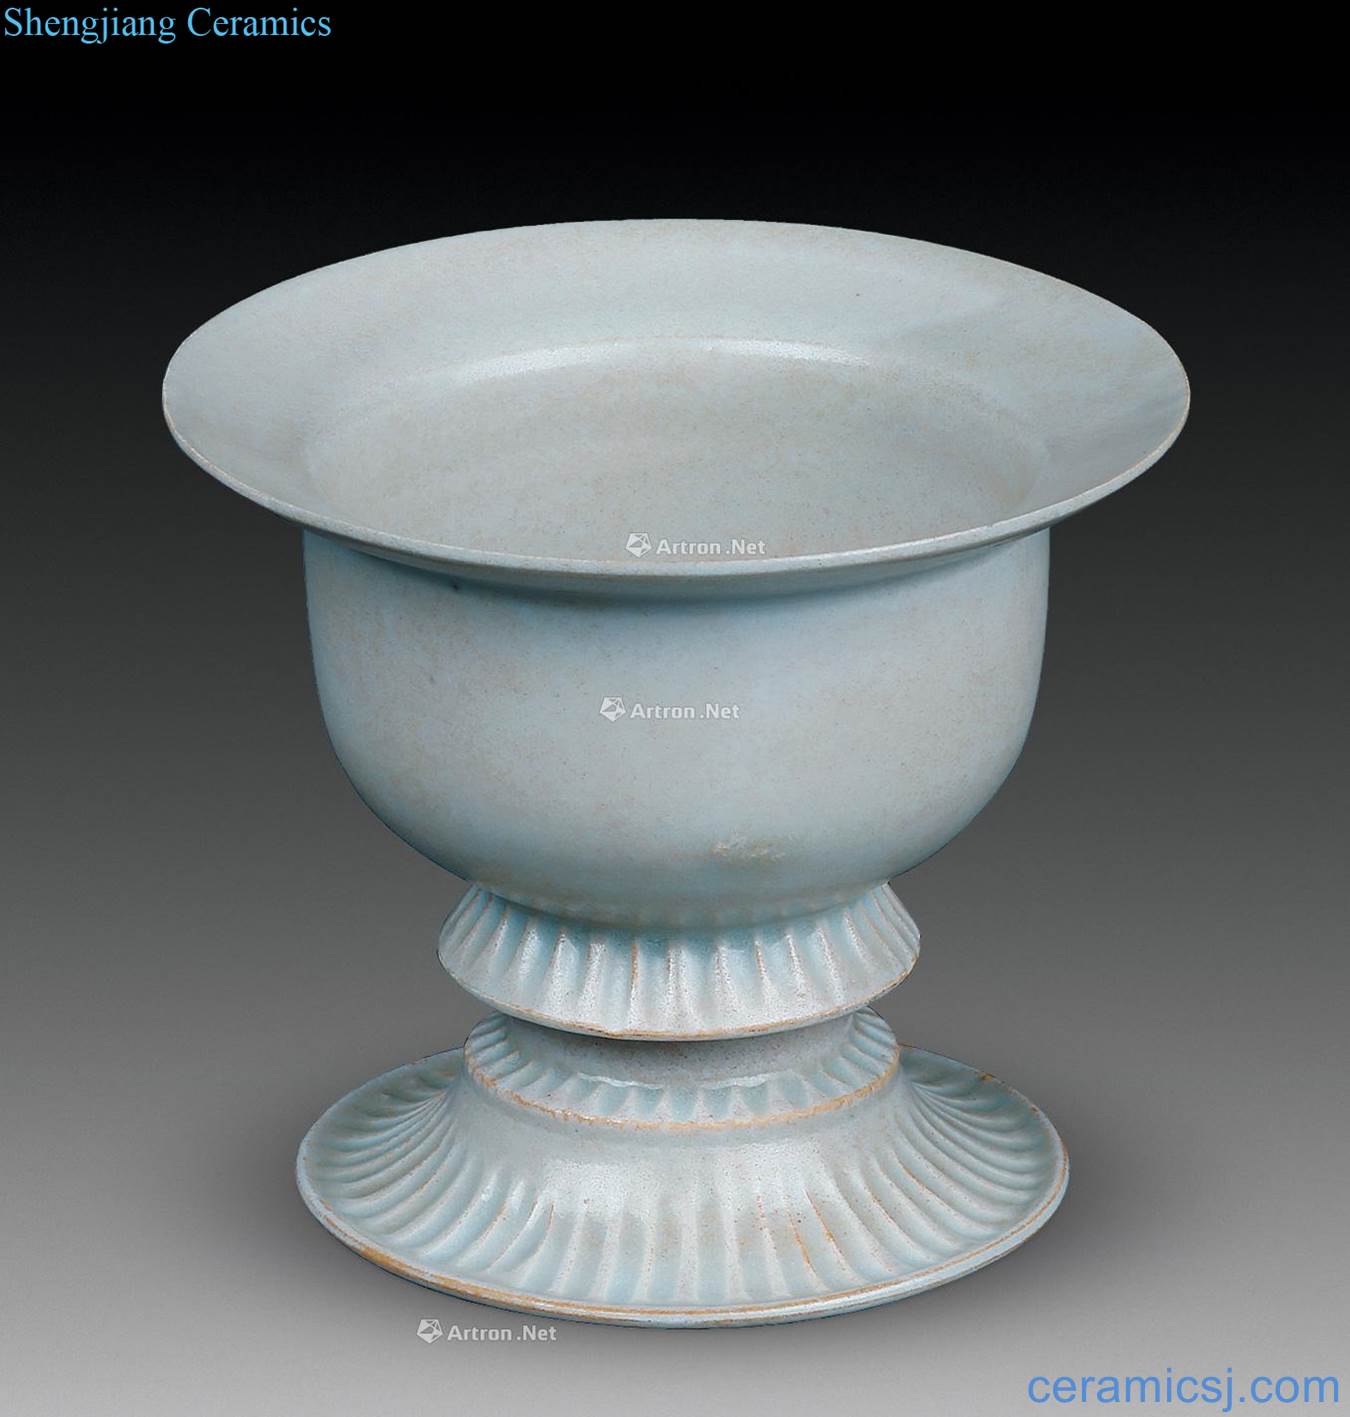 The song dynasty Green craft incense burner (a)